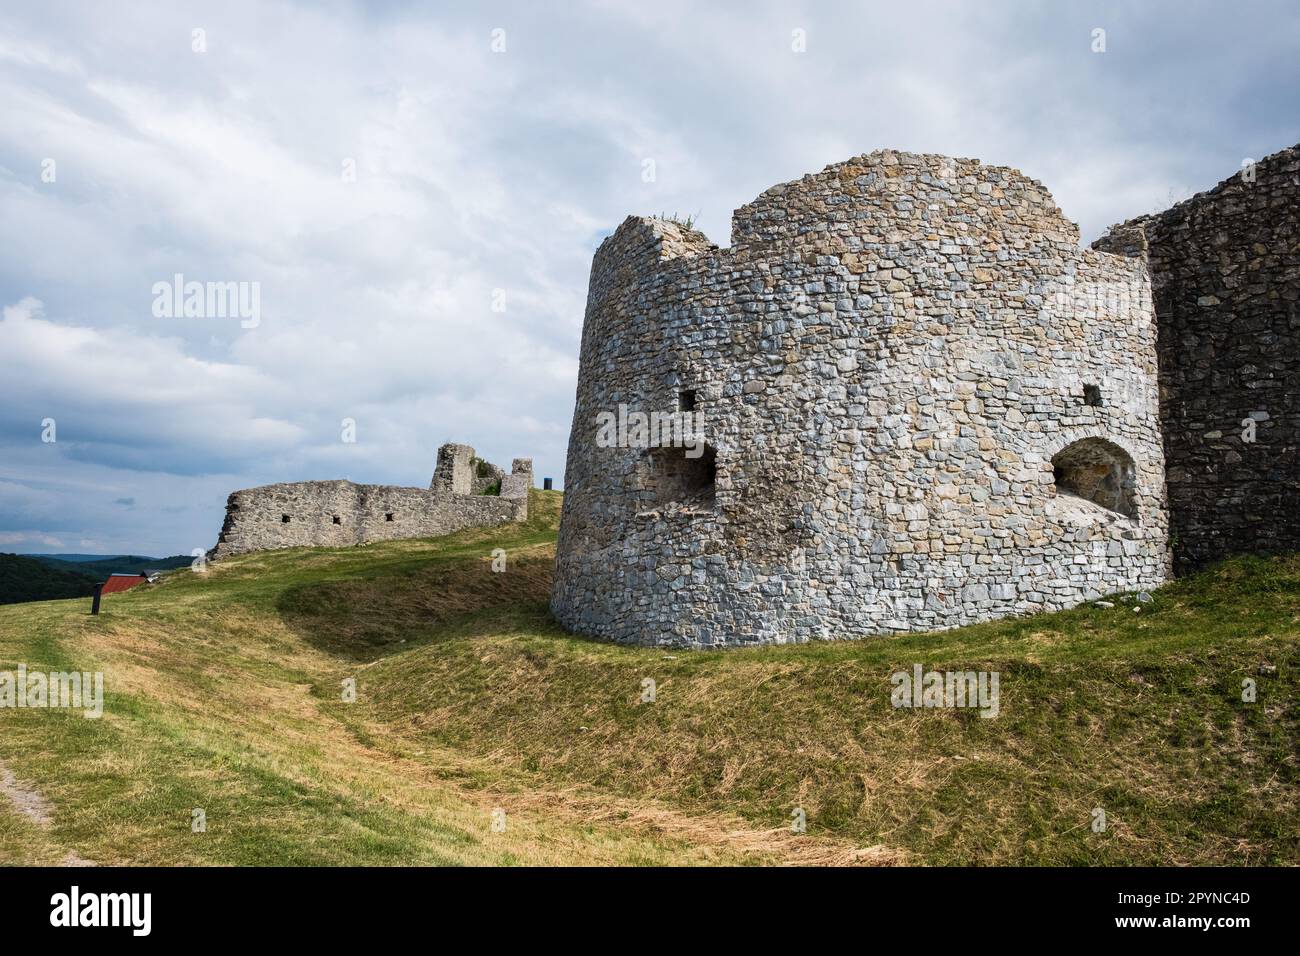 Ruined Medieval fortress stone castle Branc Hrad in Podbranch village, Myjava district of Little Carpathian mountains, Slovakia Stock Photo